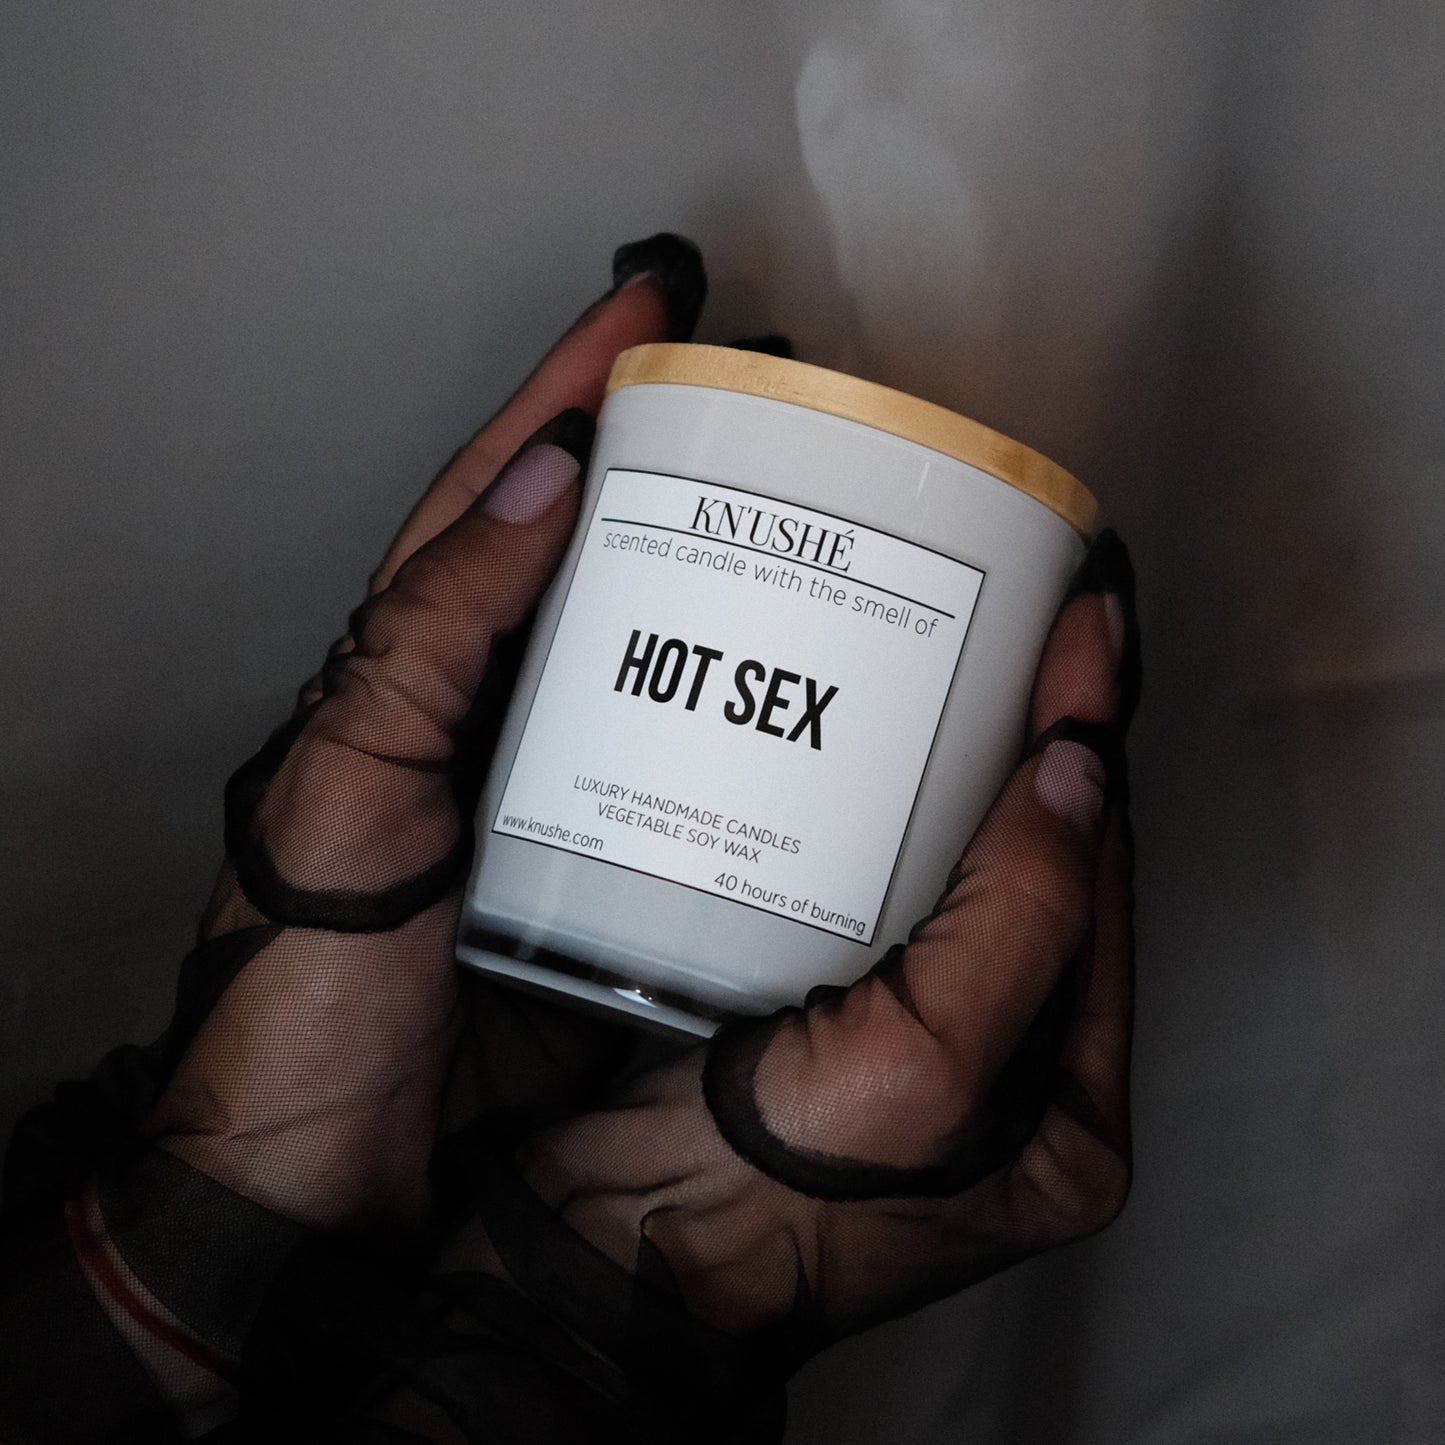 Scented candle  with the smell of "HOT SEX"